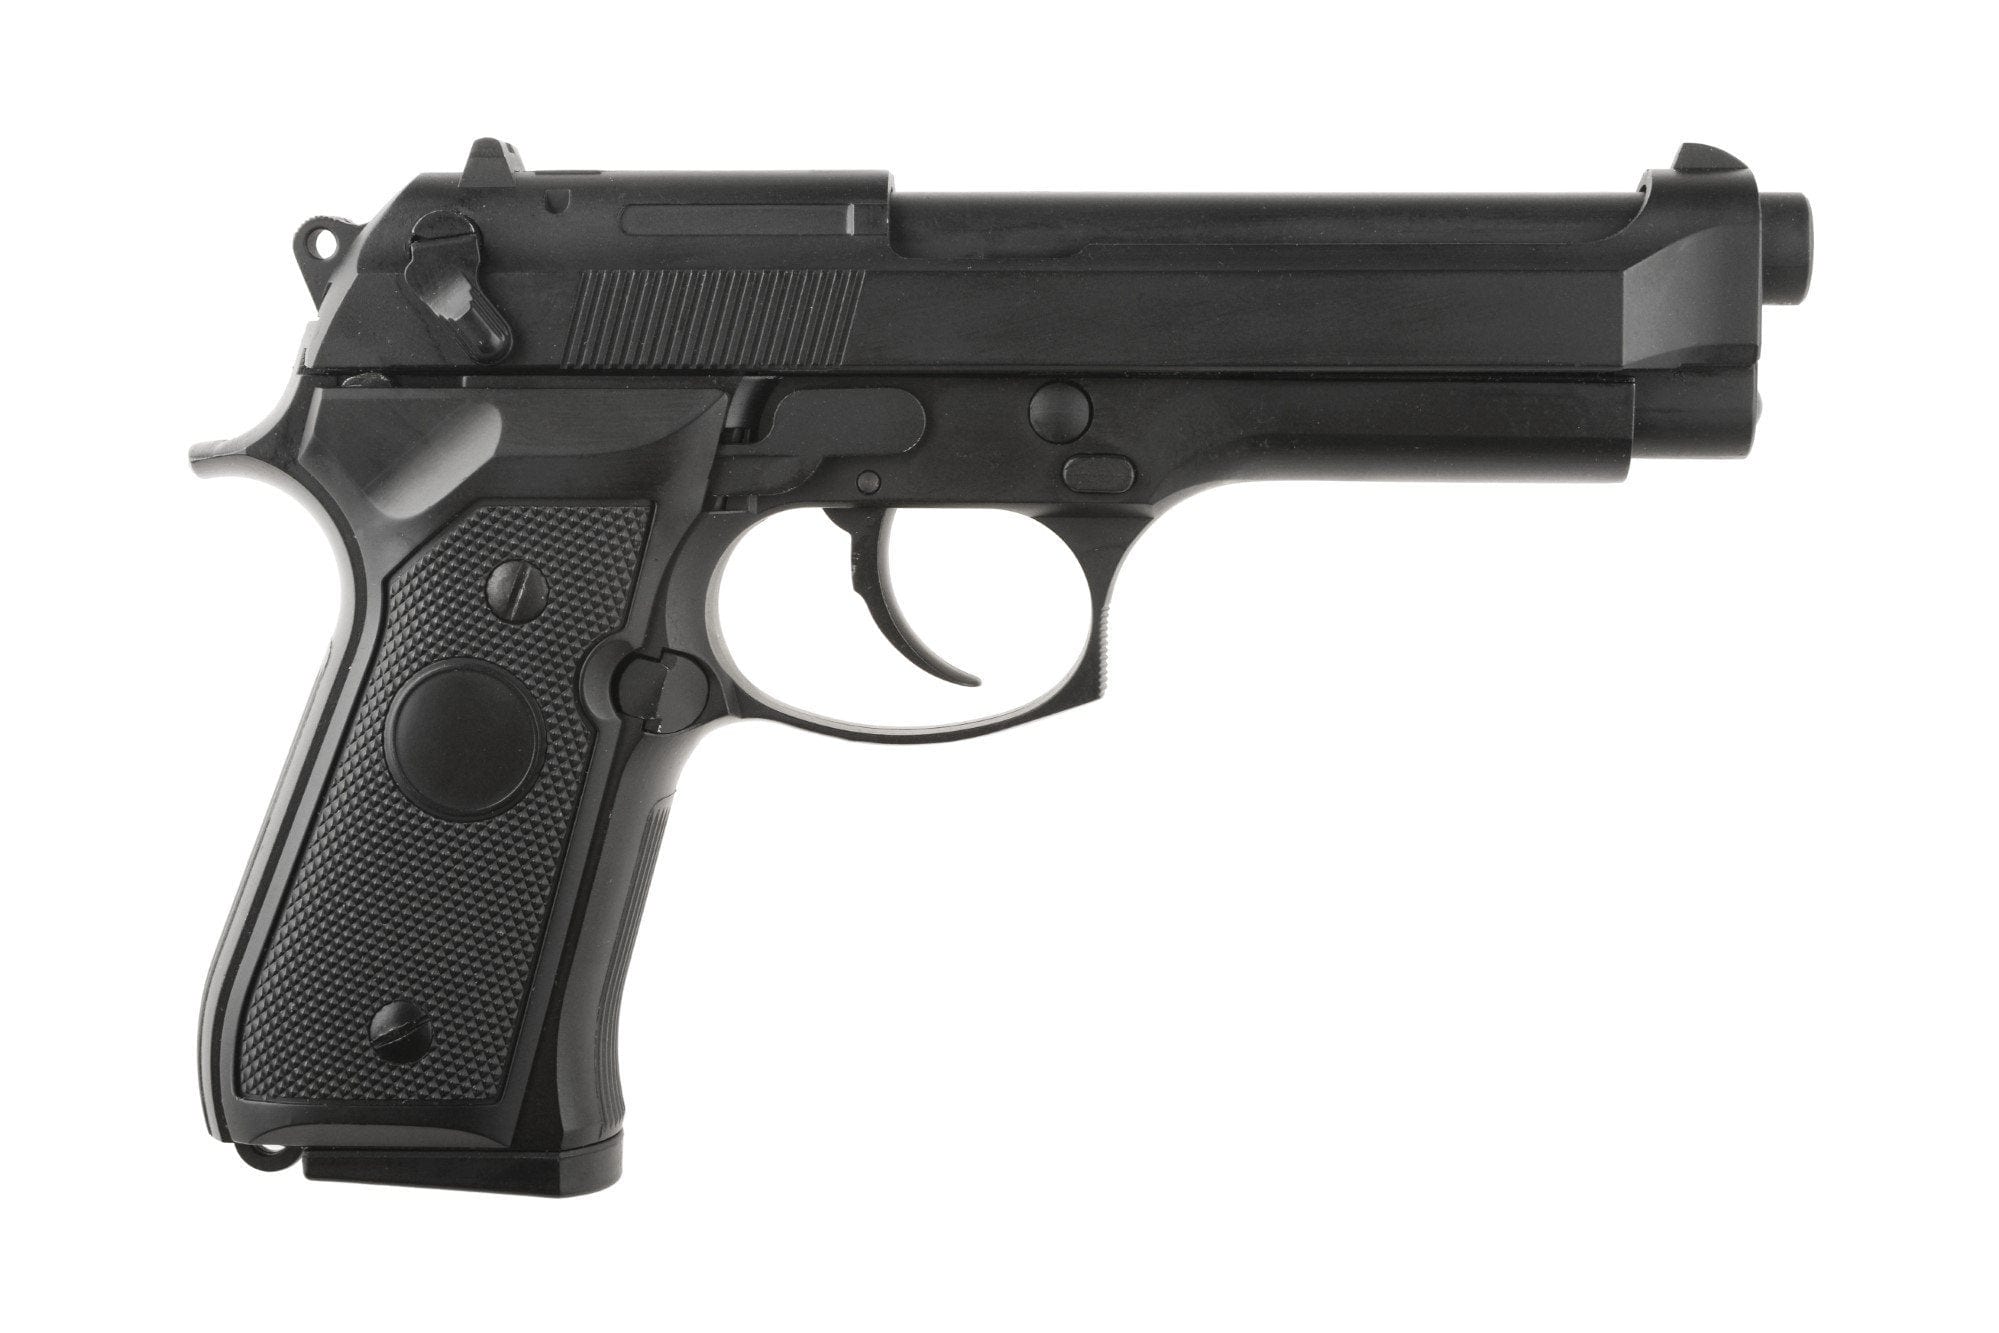 Beretta 92 Airsoft Pistol | G195 by WELL on Airsoft Mania Europe